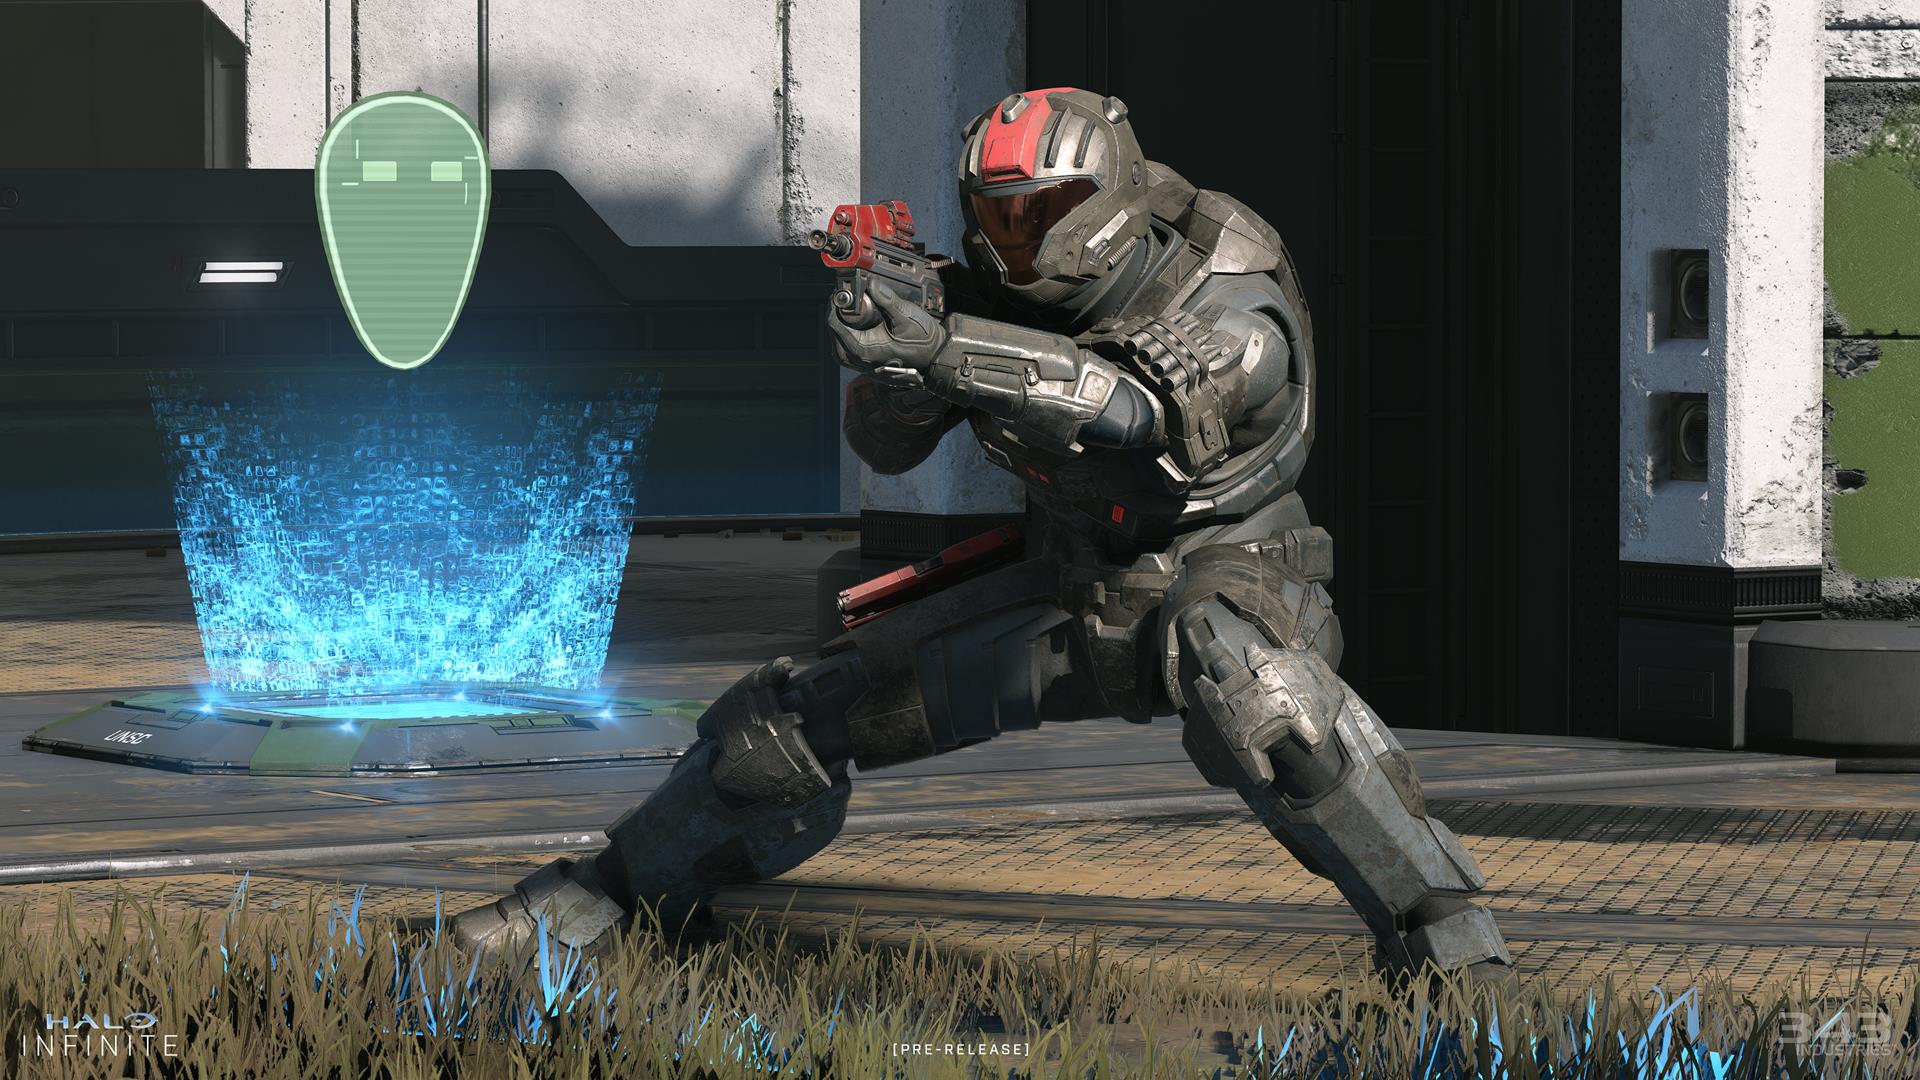 Halo Infinite Spartan in a combat pose preparing to fire a weapon